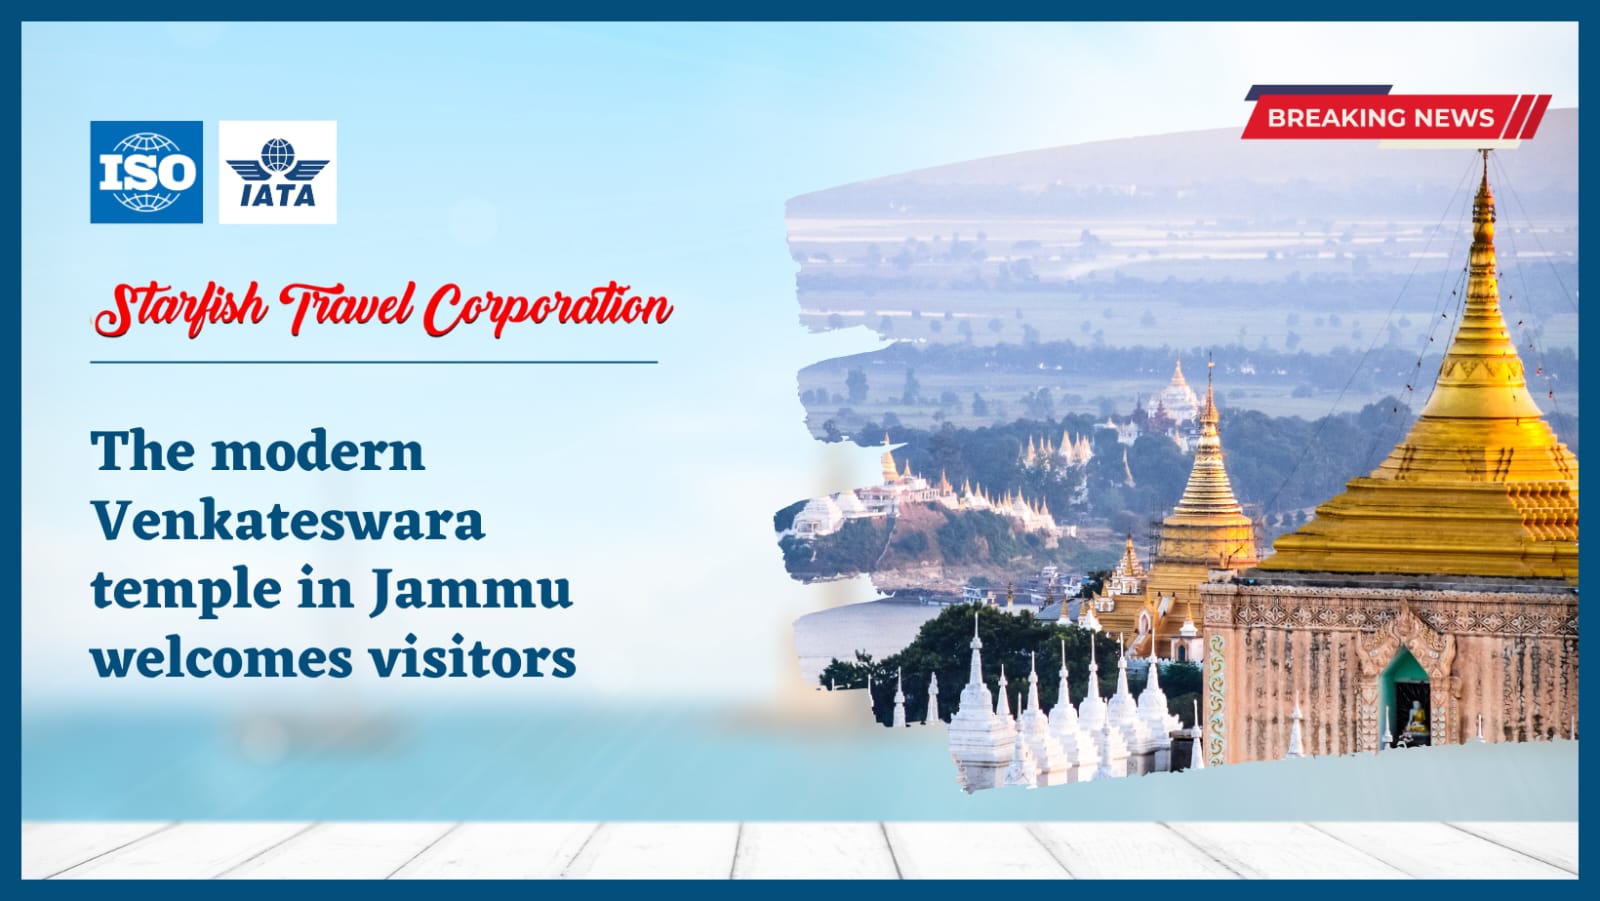 You are currently viewing The modern Venkateswara temple in Jammu welcomes visitors.